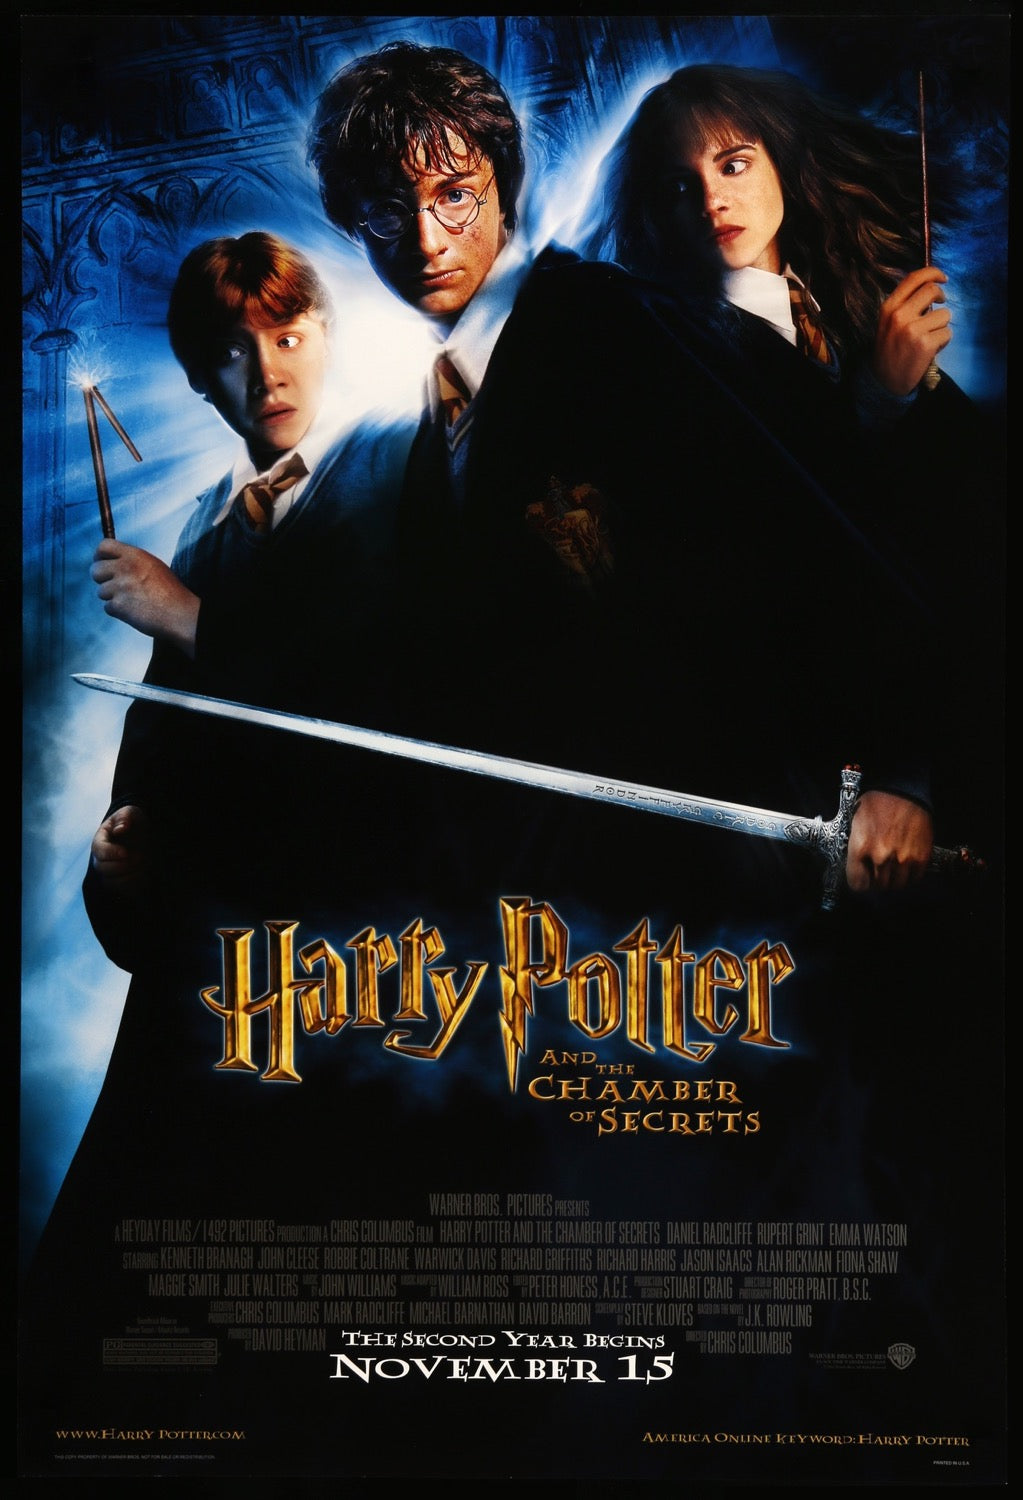 Harry Potter and the Chamber of Secrets (2002) original movie poster for sale at Original Film Art